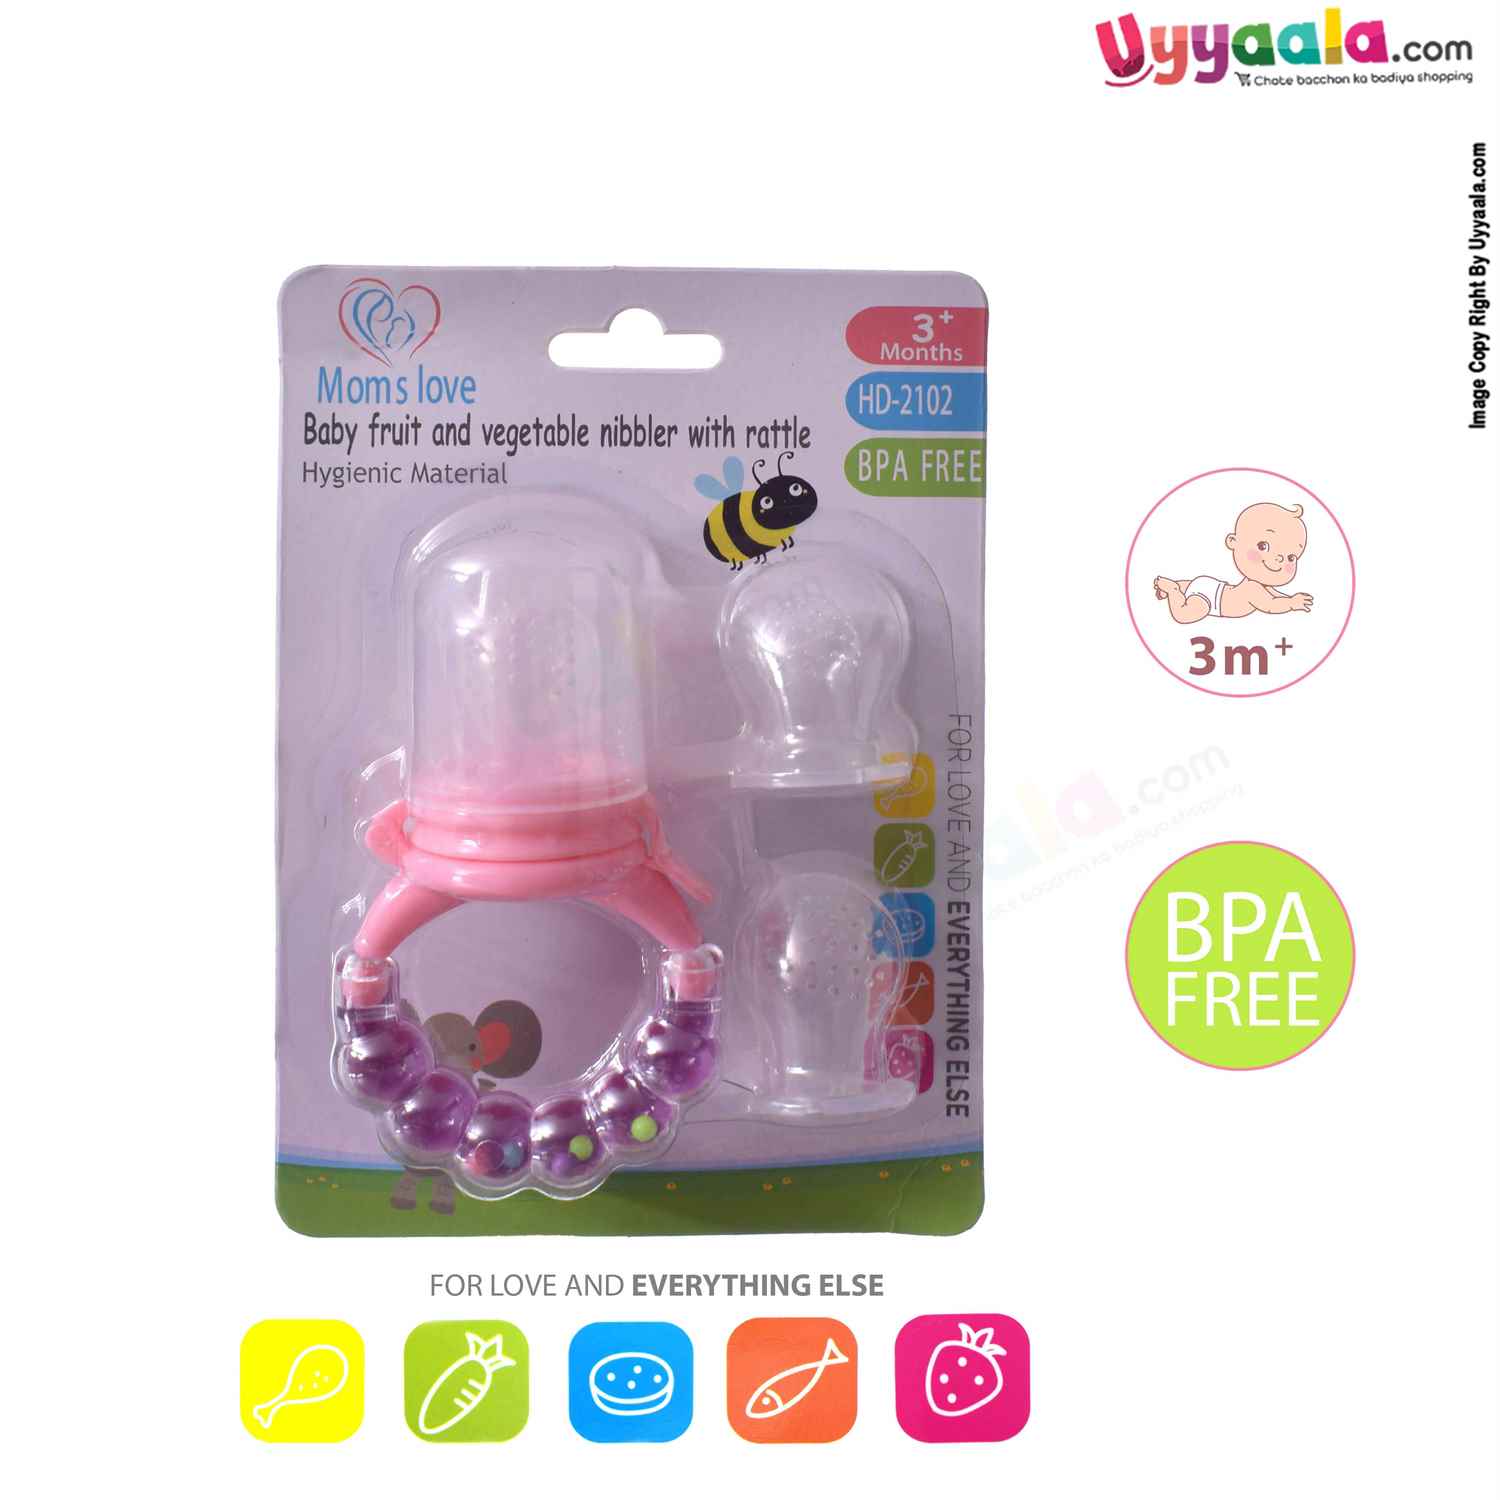 MOMS LOVE Baby Fruit & Vegetable's Nibbler With Extra 2 Nibs And with Rattle- 3m+age